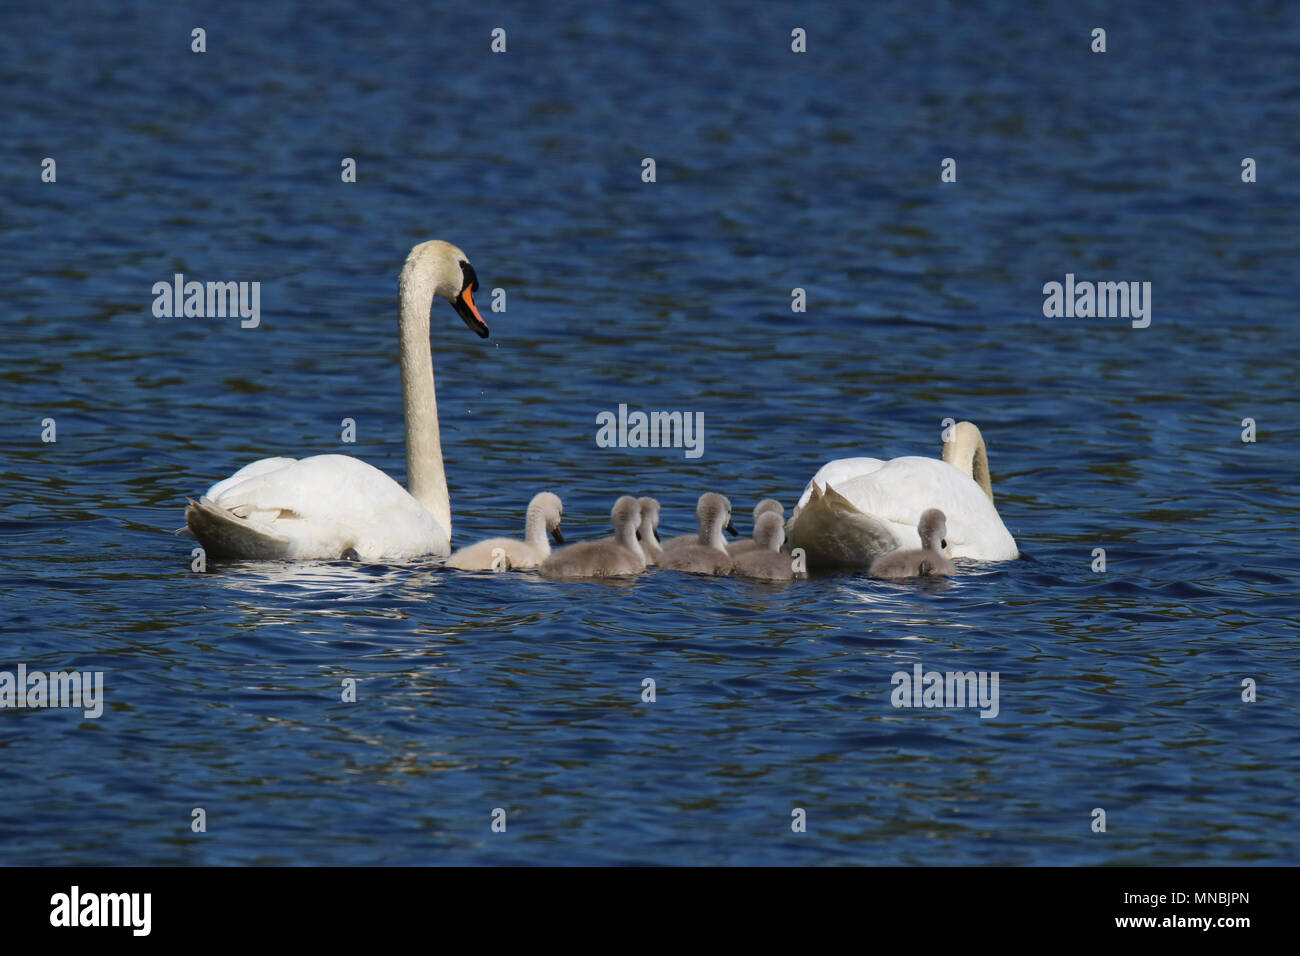 A family of mute swans Cygnus olor swimming together on a pond in Spring Stock Photo